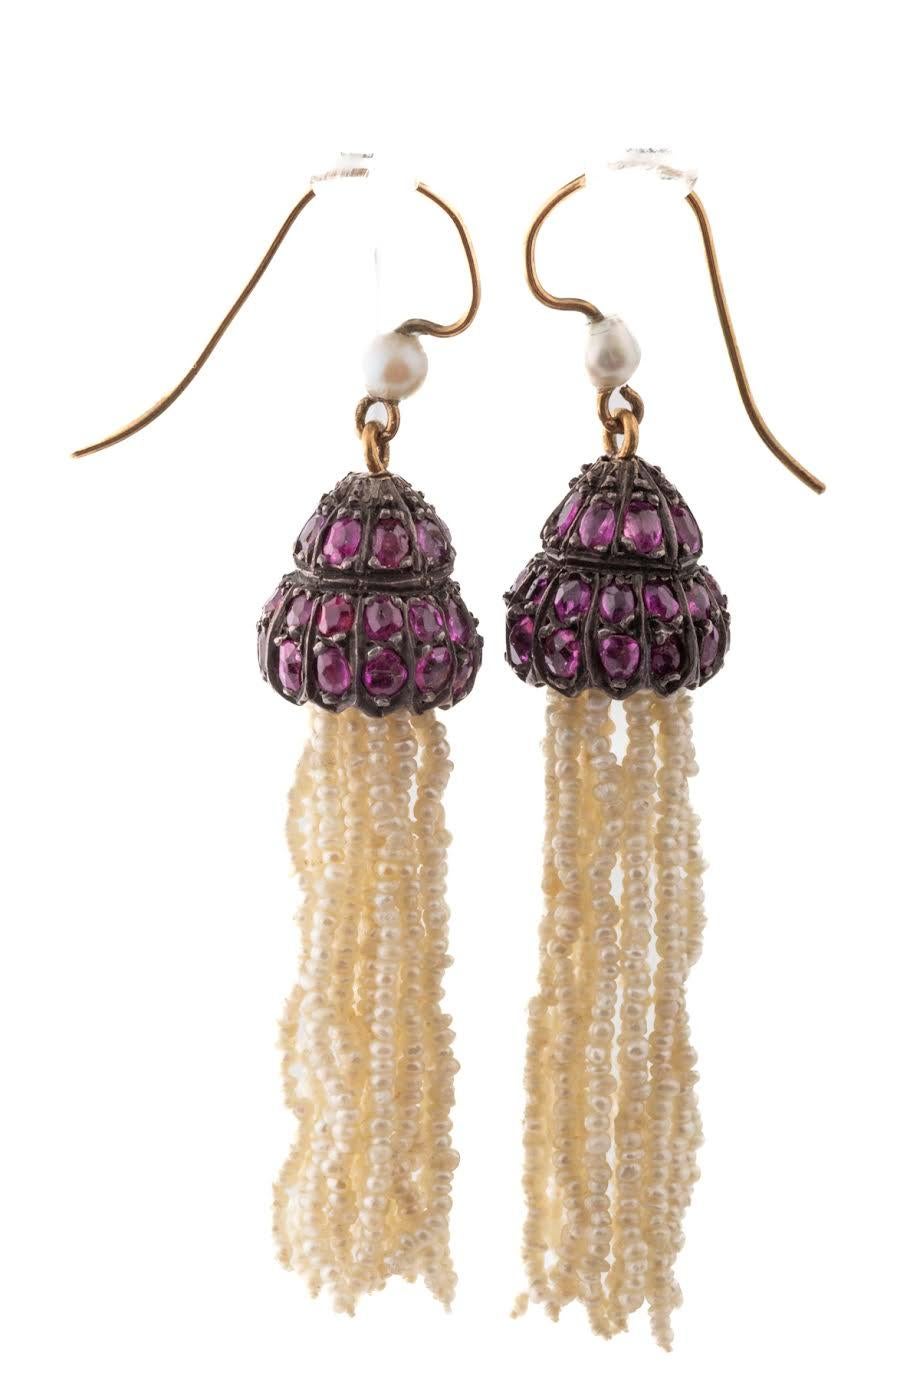 Take a cruise on the River Thames, the river where the seed pearls that make the fringe of these earrings originate. Who did the selection, matching and beading of this tiny pearls? Much of this had to be women's hands as they were small and able to